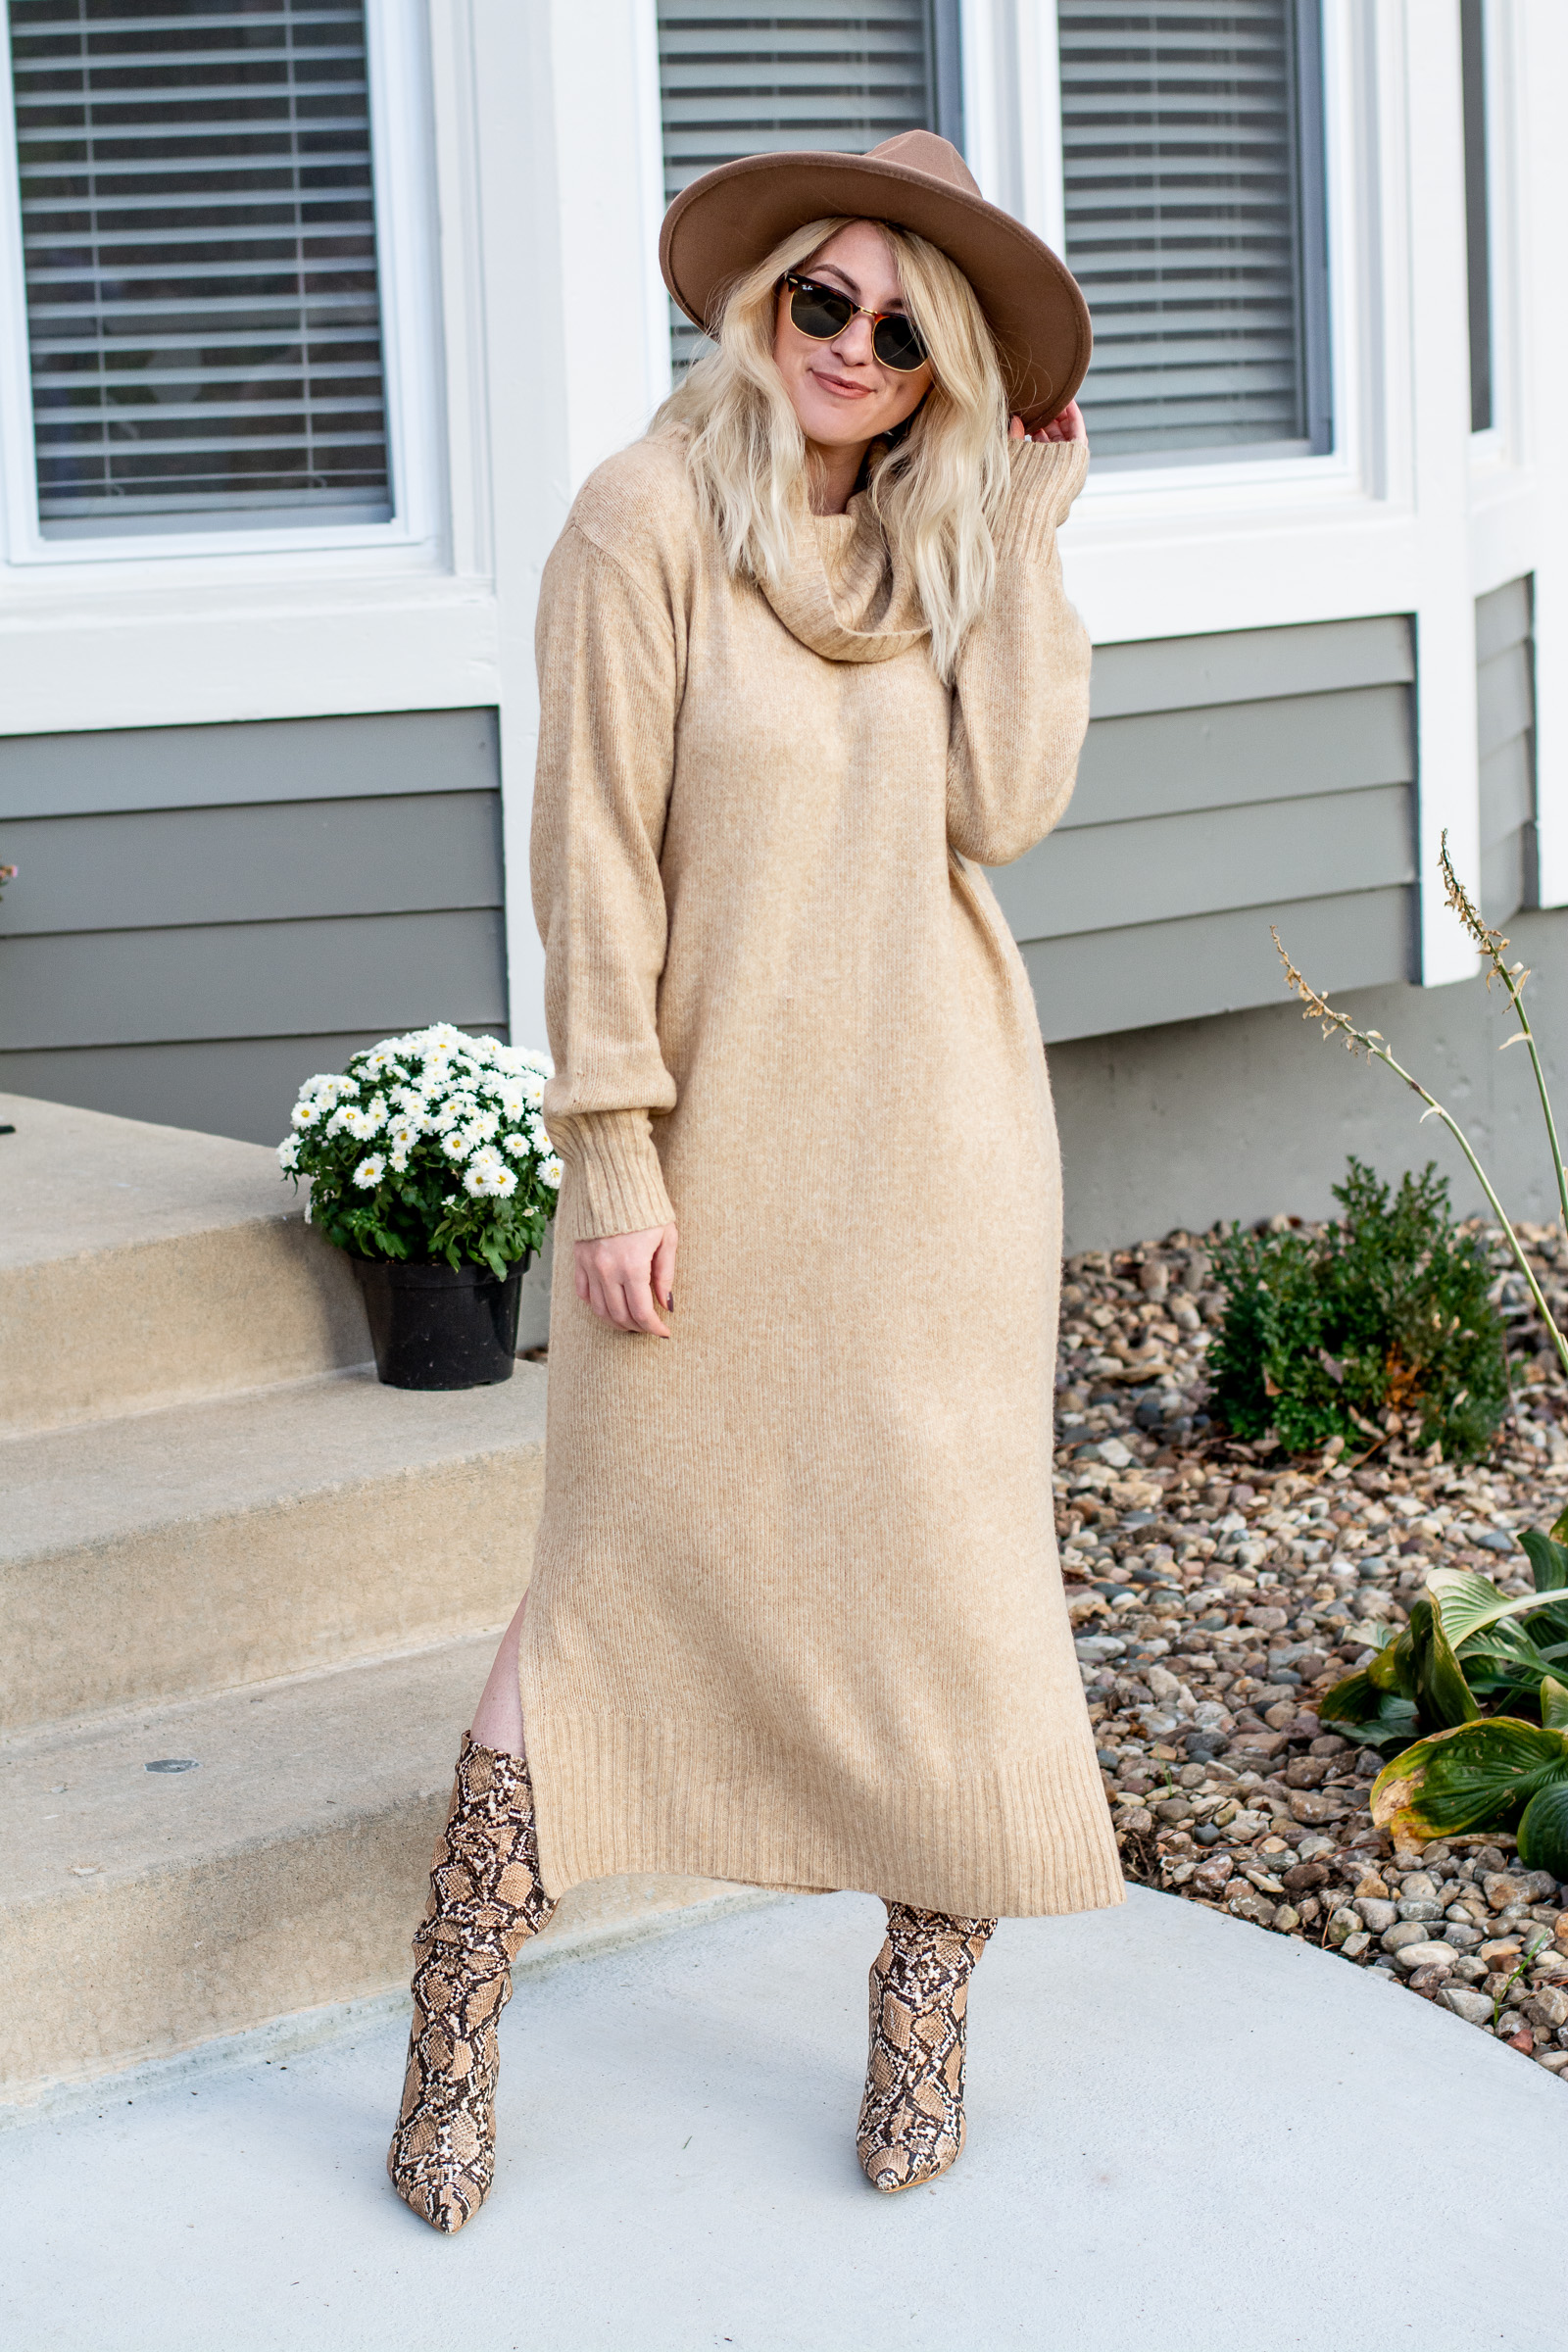 Thanksgiving Outfit: Oversized Sweater Dress + Snakeskin Boots. | LSR